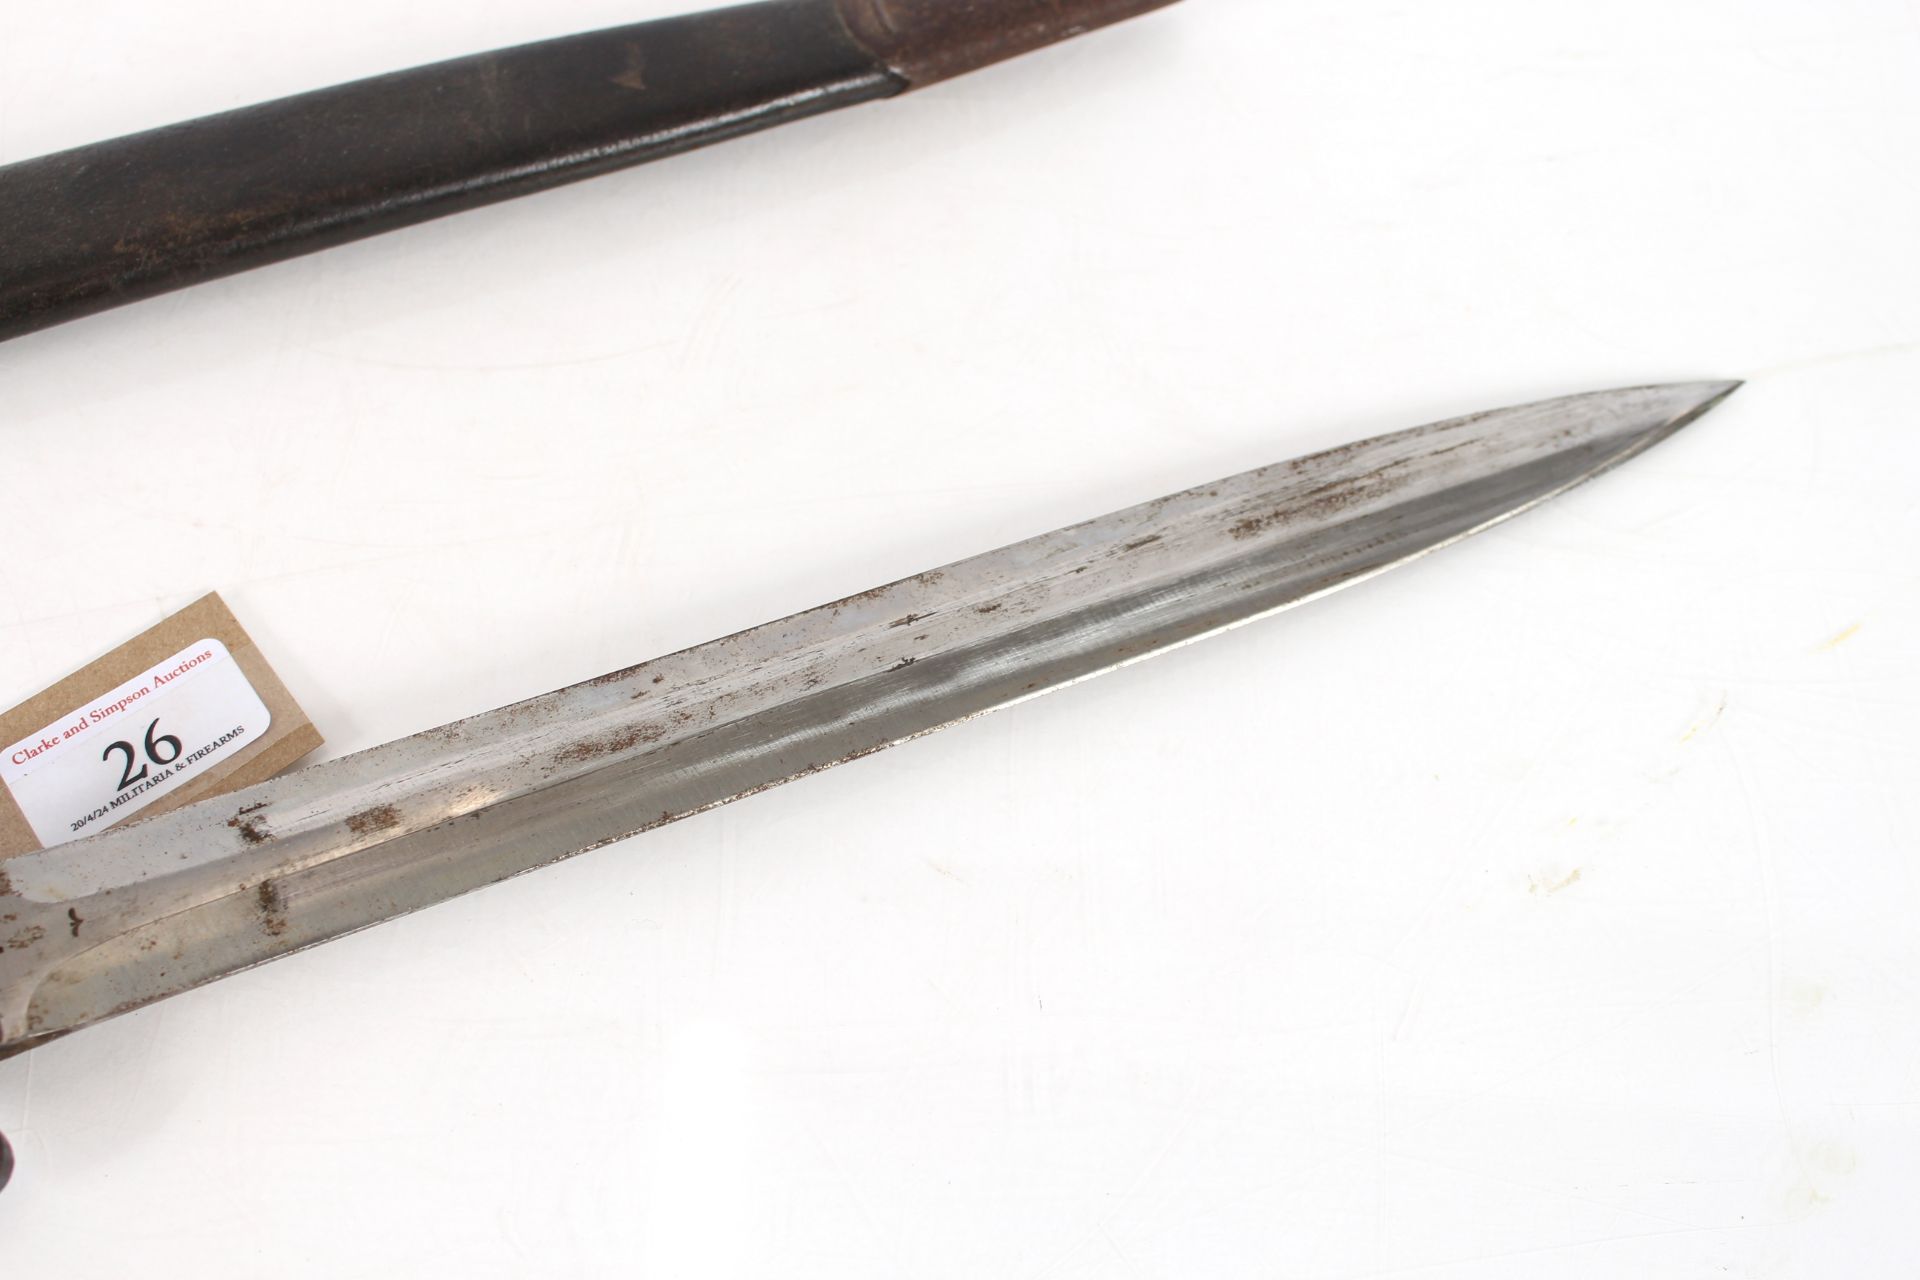 A British model 1888 MkIII bayonet and scabbard by - Image 4 of 8